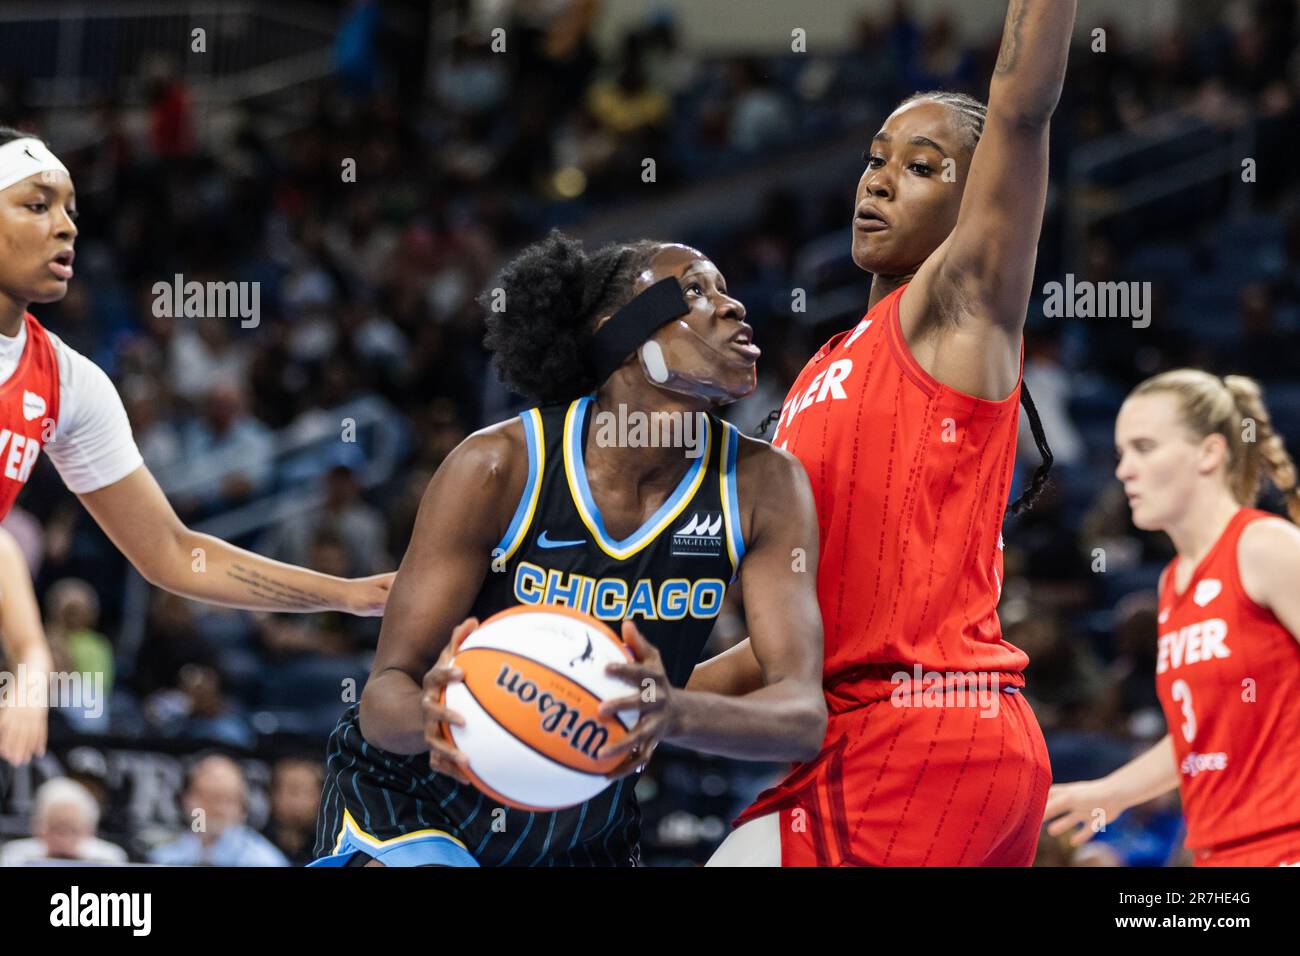 Chicago, USA. 15th June, 2023. Chicago, USA, June 15, 2023: Queen Egbo (3 Indiana Fever) fouls Sika Kone (23 Chicago Sky) during the game between the Chicago Sky and Indiana Fever on Thursday June 15, 2023 at Wintrust Arena, Chicago, USA. (NO COMMERCIAL USAGE) (Shaina Benhiyoun/SPP) Credit: SPP Sport Press Photo. /Alamy Live News Stock Photo